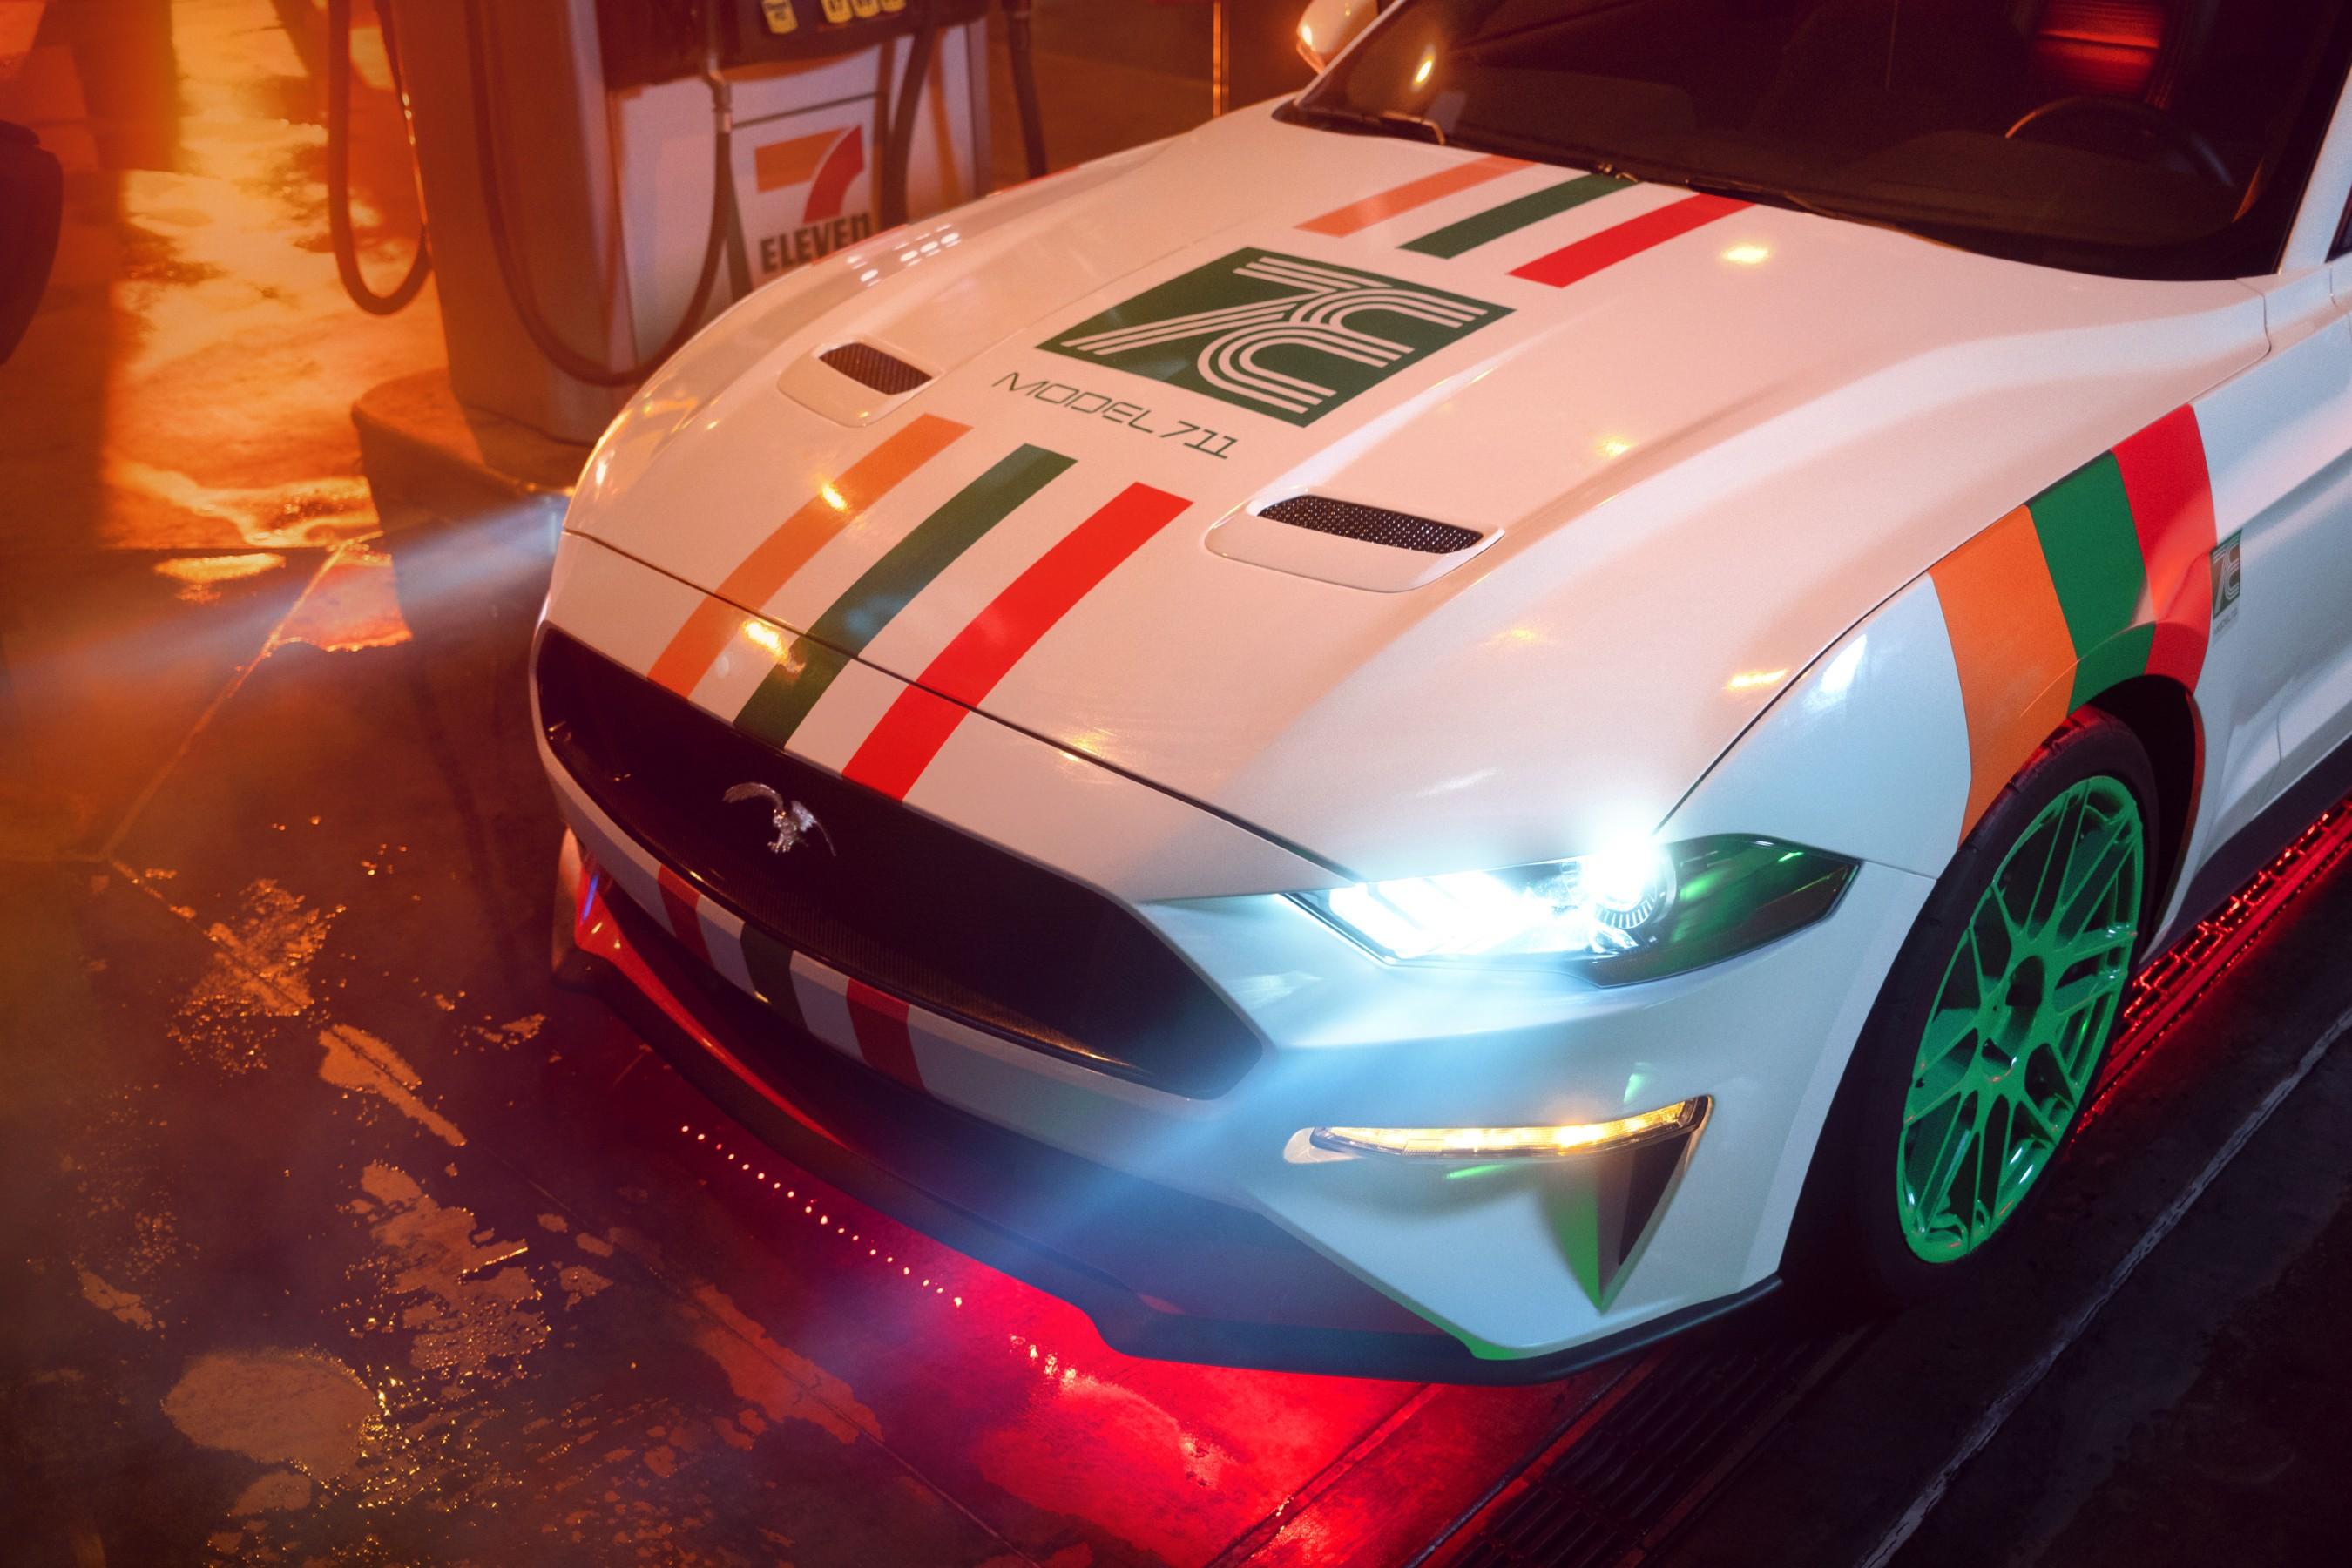 The customized 7-11 Mustang, white with red, green and orange stripes and green wheels. 